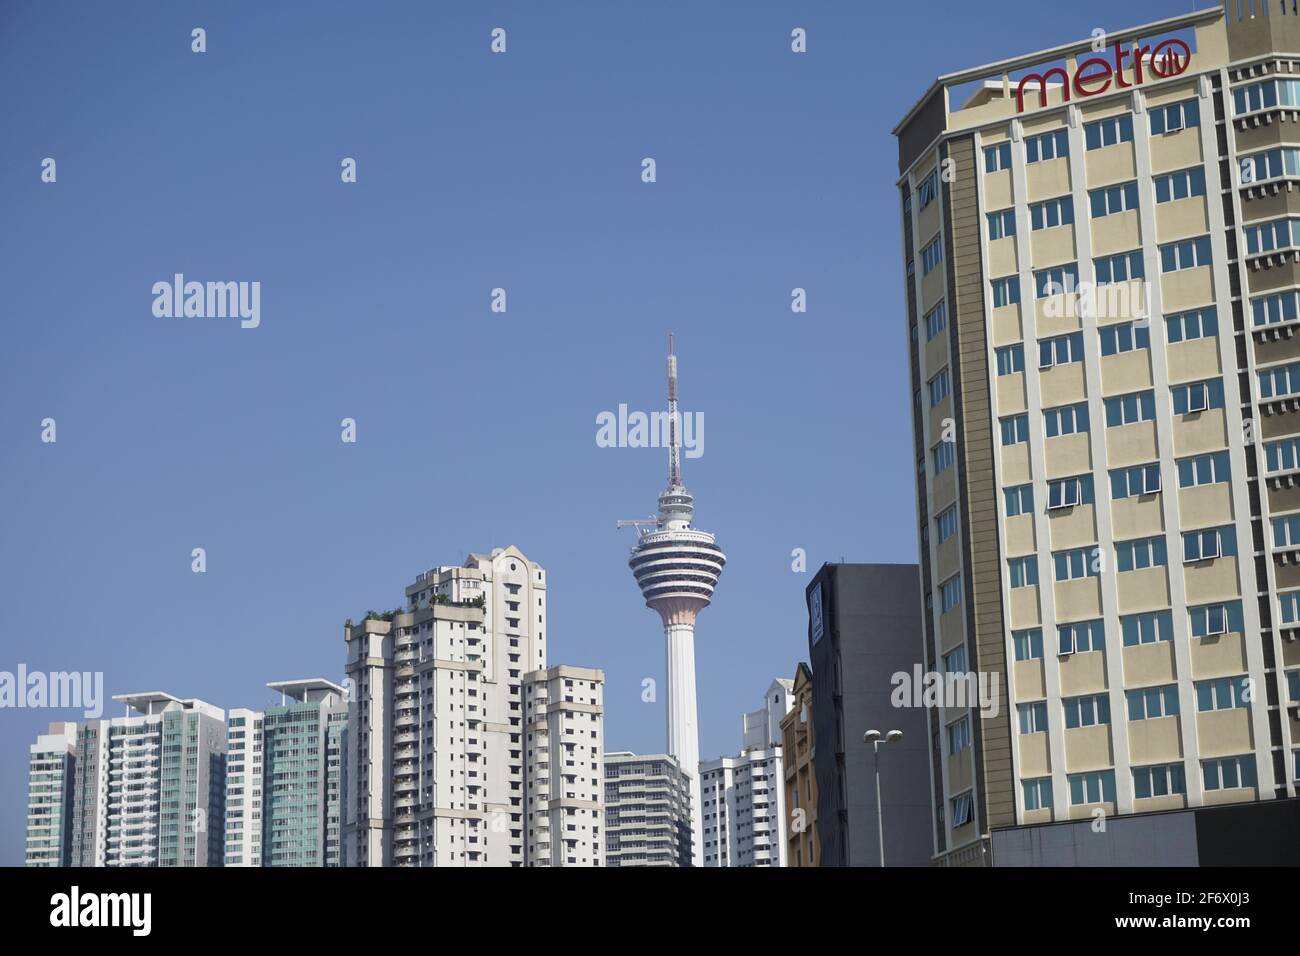 KL tower amidst buildings in Kuala Lumpur Stock Photo